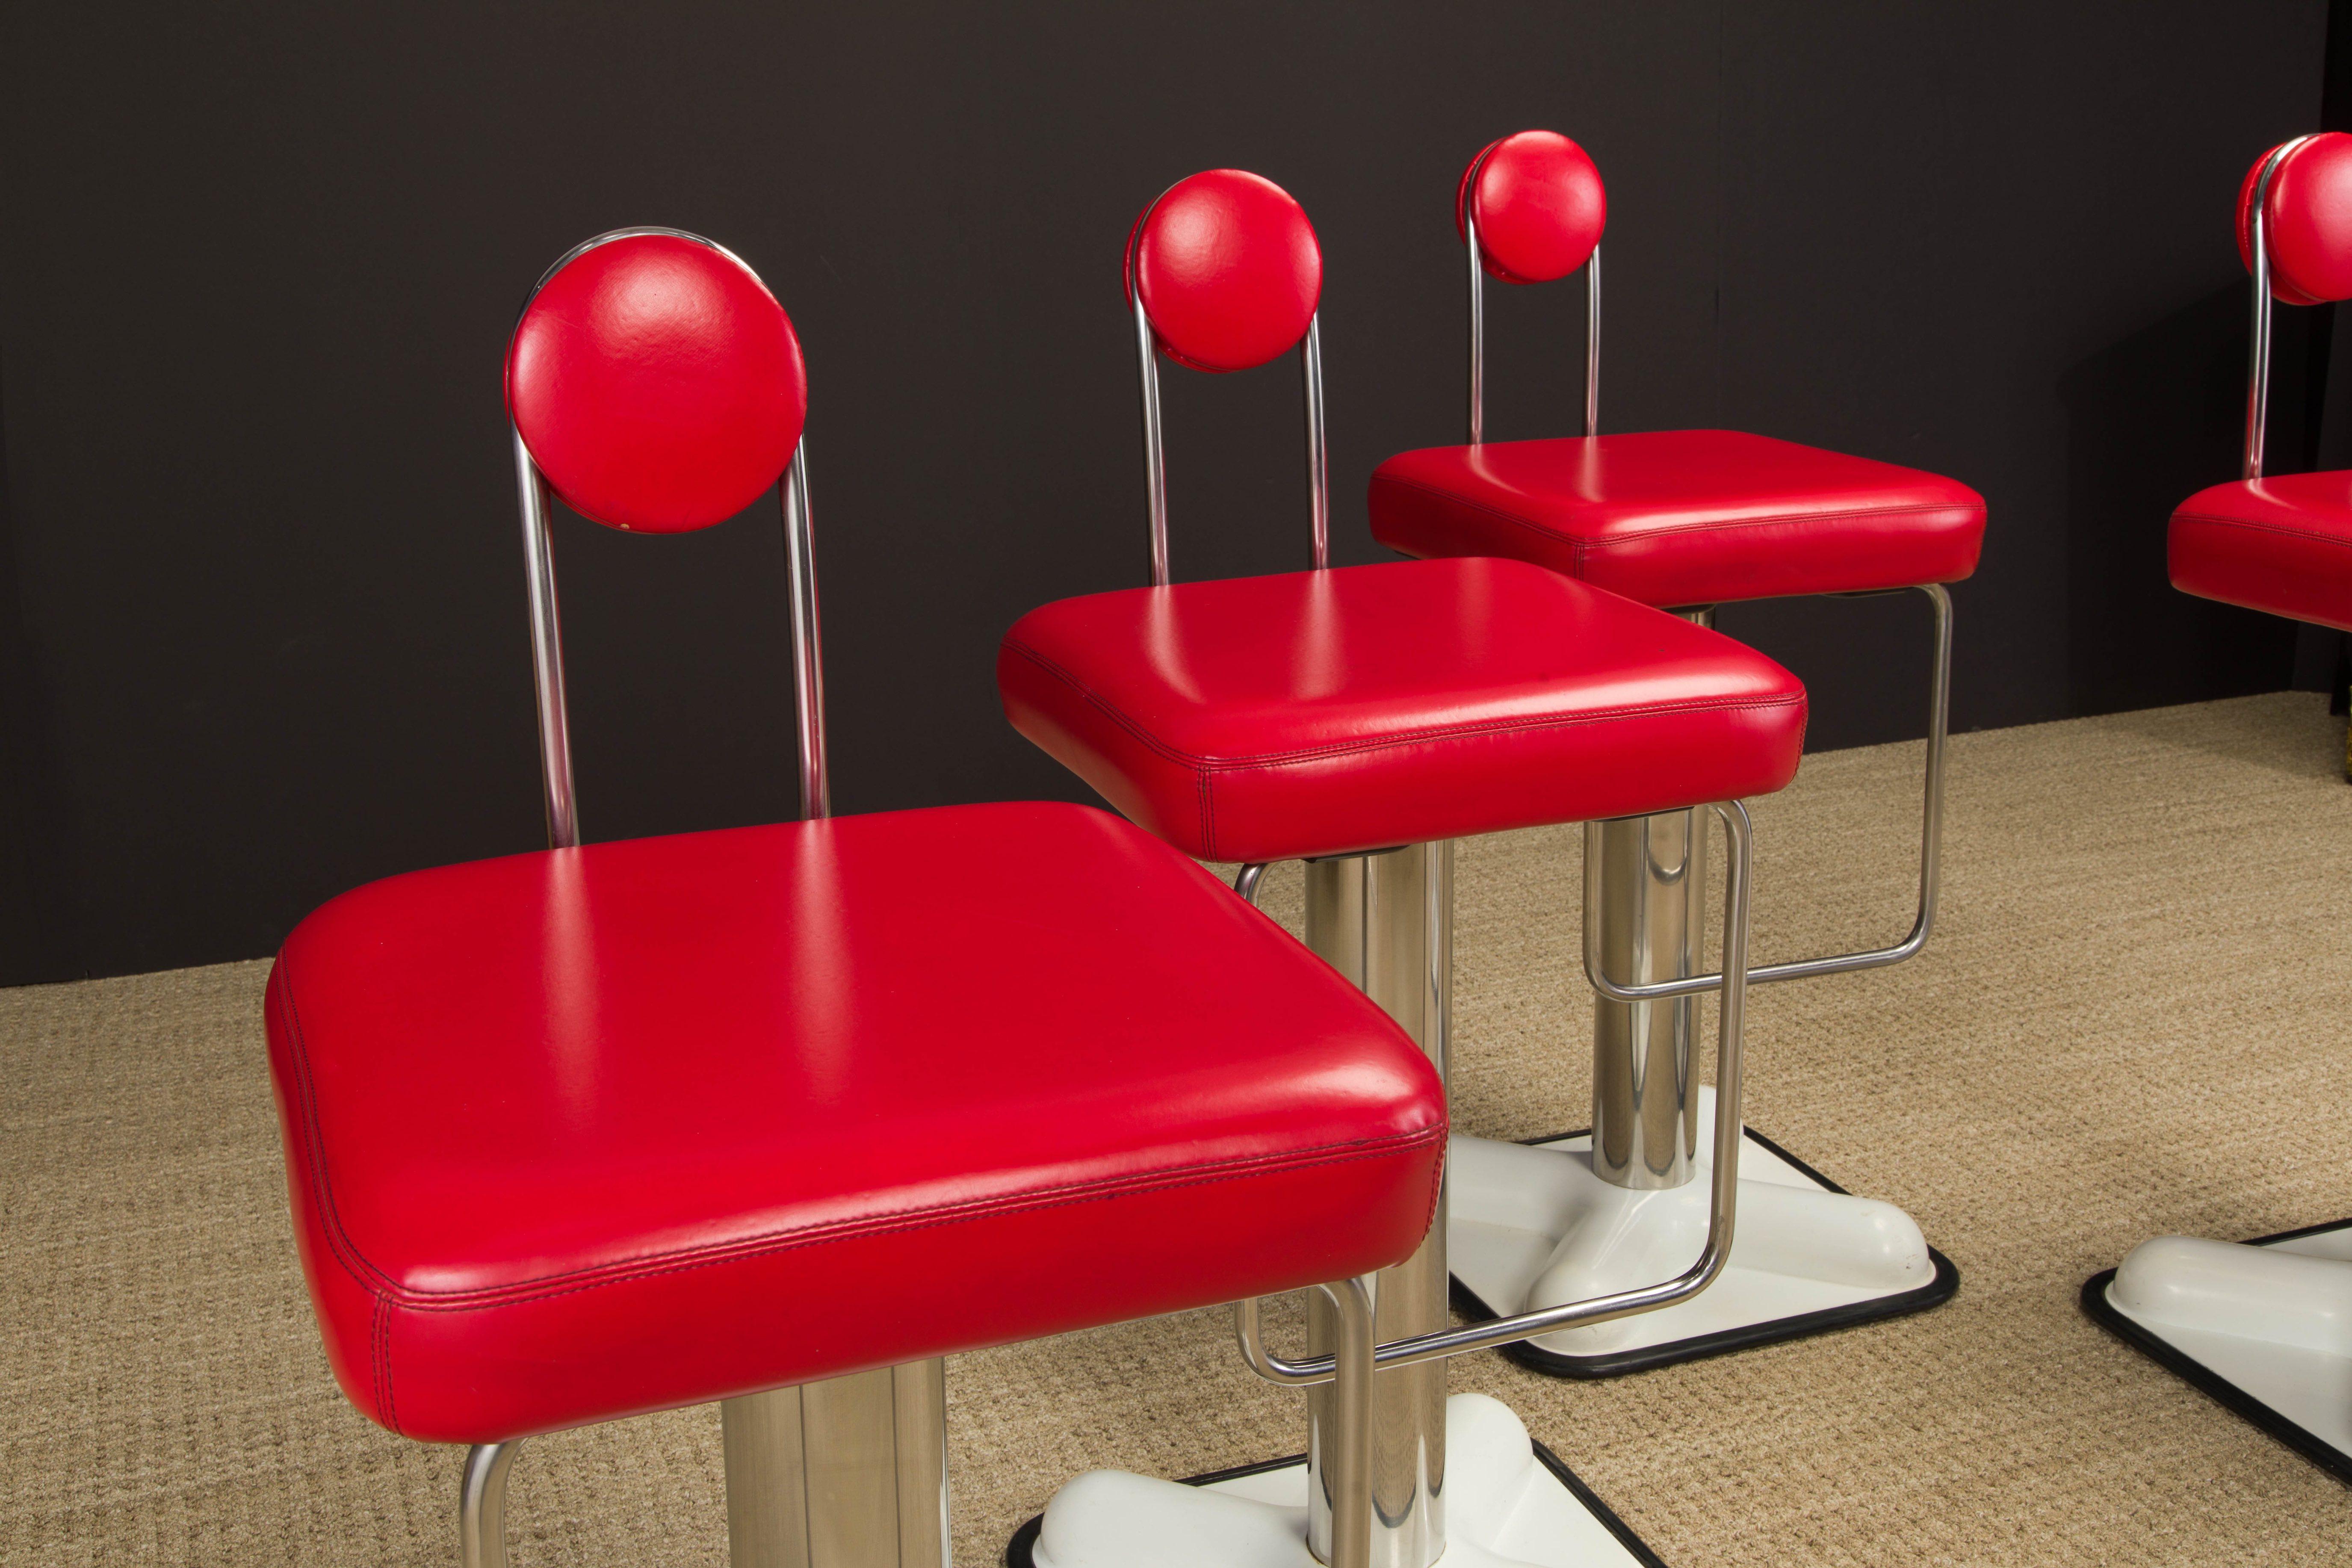 Original 'Birillo' Barstools Set by Joe Colombo for Zanotta, c. 1971, Signed  In Good Condition For Sale In Los Angeles, CA